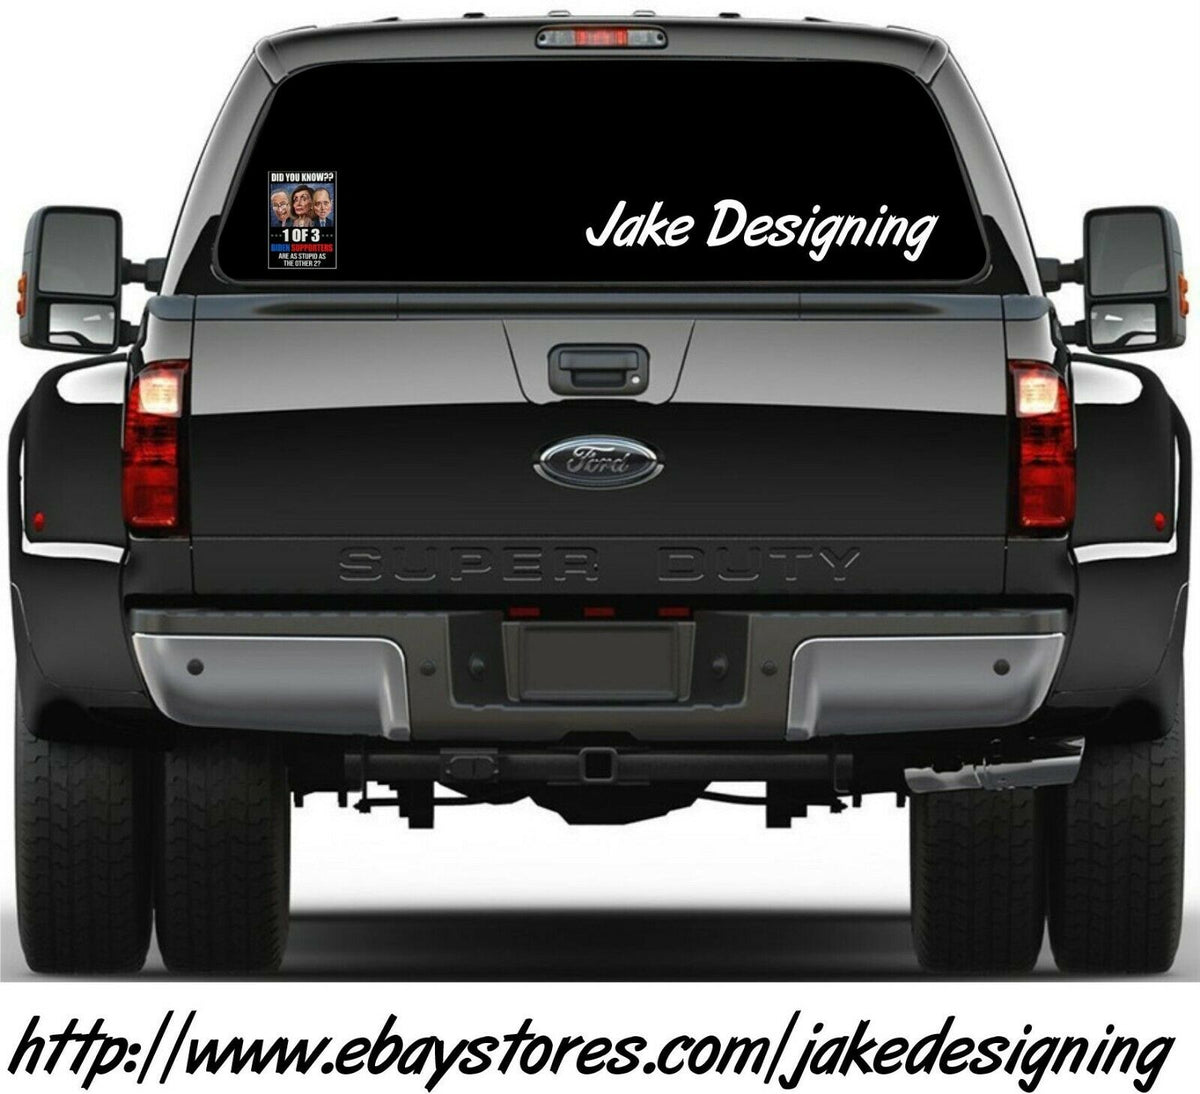 Anti Joe Biden Bumper Sticker or Magnet - 1 out of 3 Biden supporters are stupid - Powercall Sirens LLC